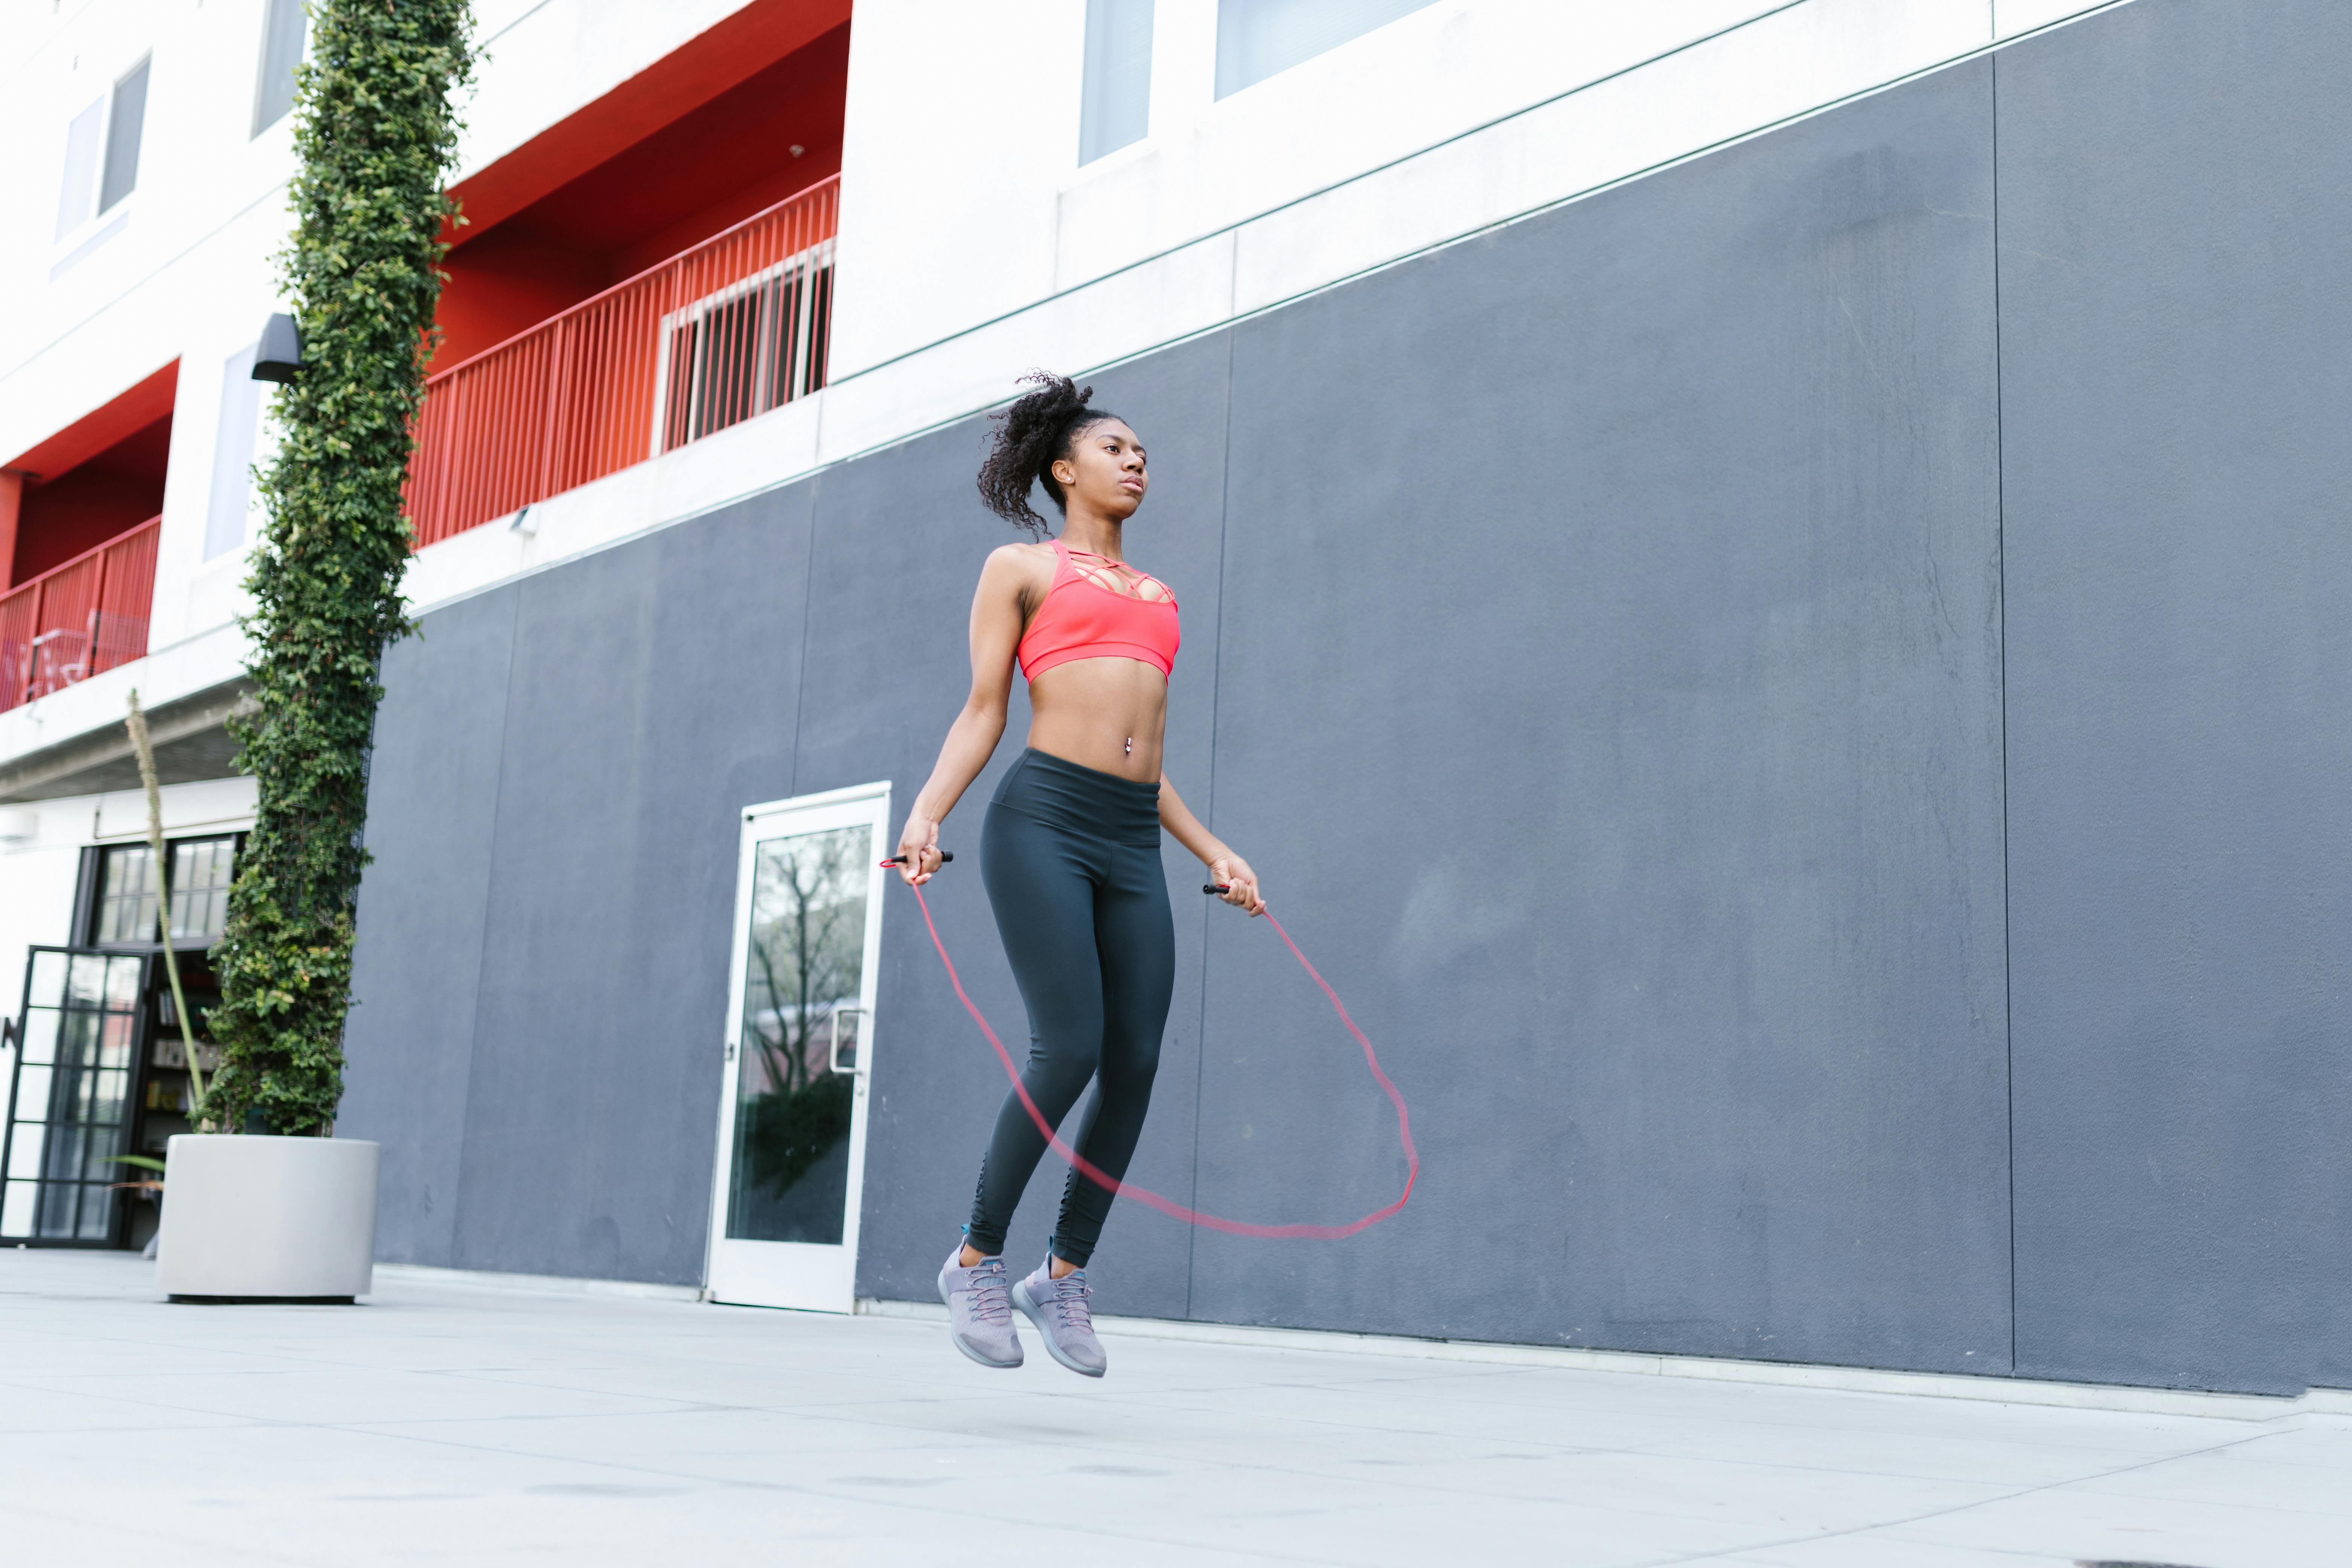 Woman Wearing a Sports Bra and Leggings Skipping Rope · Free Stock Photo